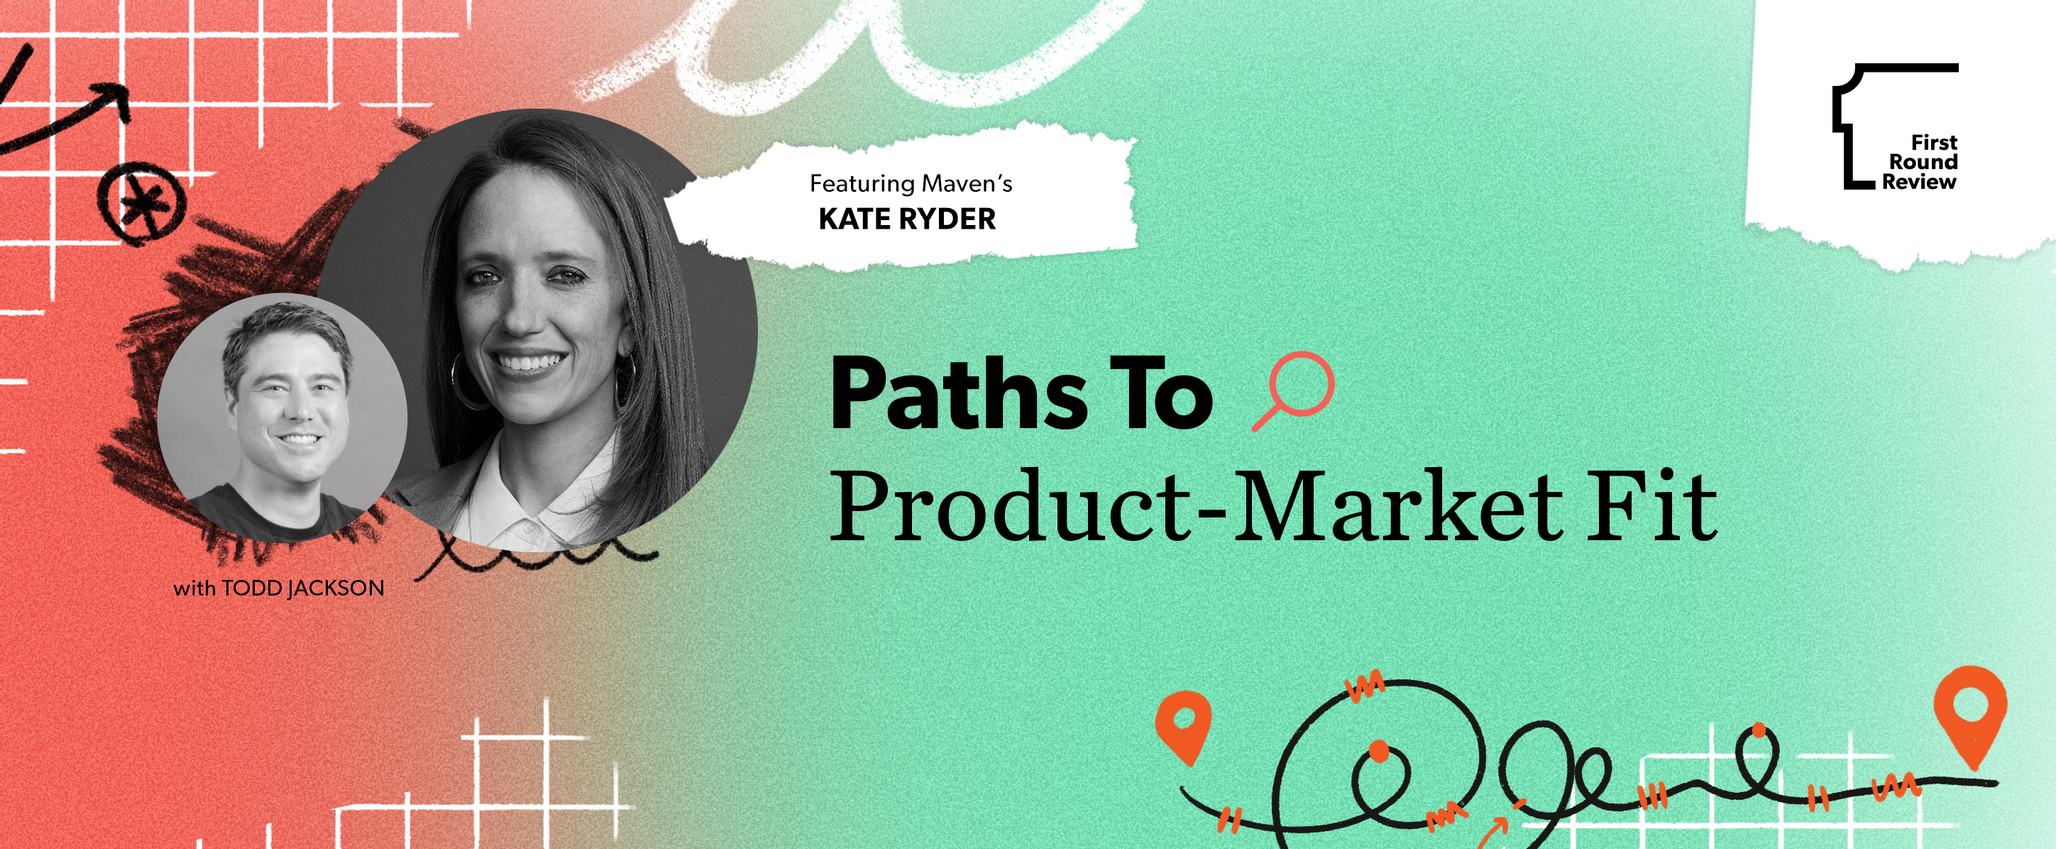 Cover image for Maven's Path to Product-Market Fit — Lessons for Leveraging Community in the Early Days